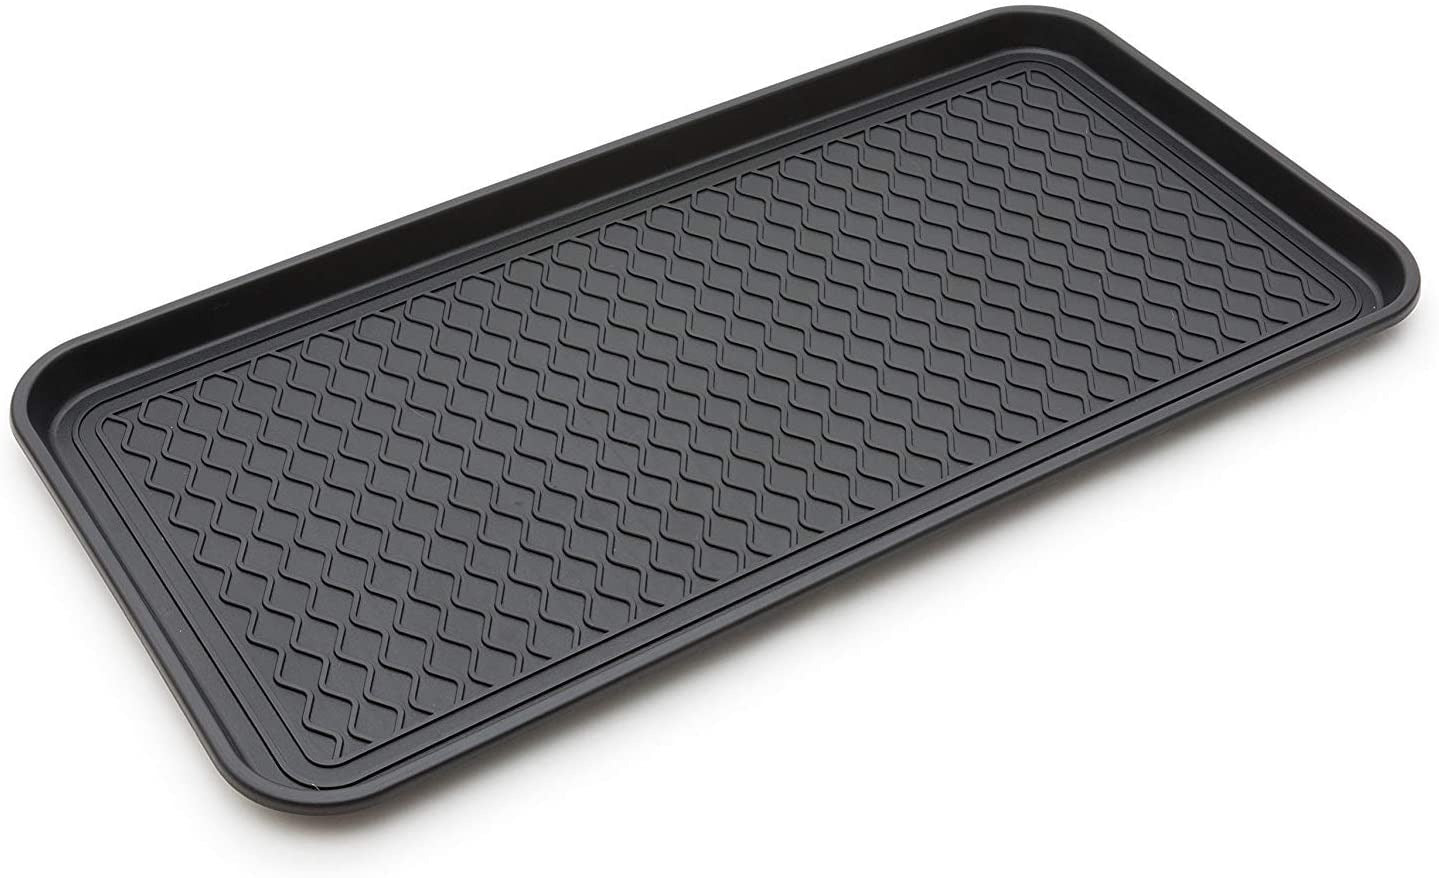 Yolju Multi-Purpose 30x15" Tray for Boots, Shoes, Plants, Pet Food, Pet Cage, Litter Box. Decorative Large Boot Tray with Lip/Sides for Indoor/Outdoor Entryway